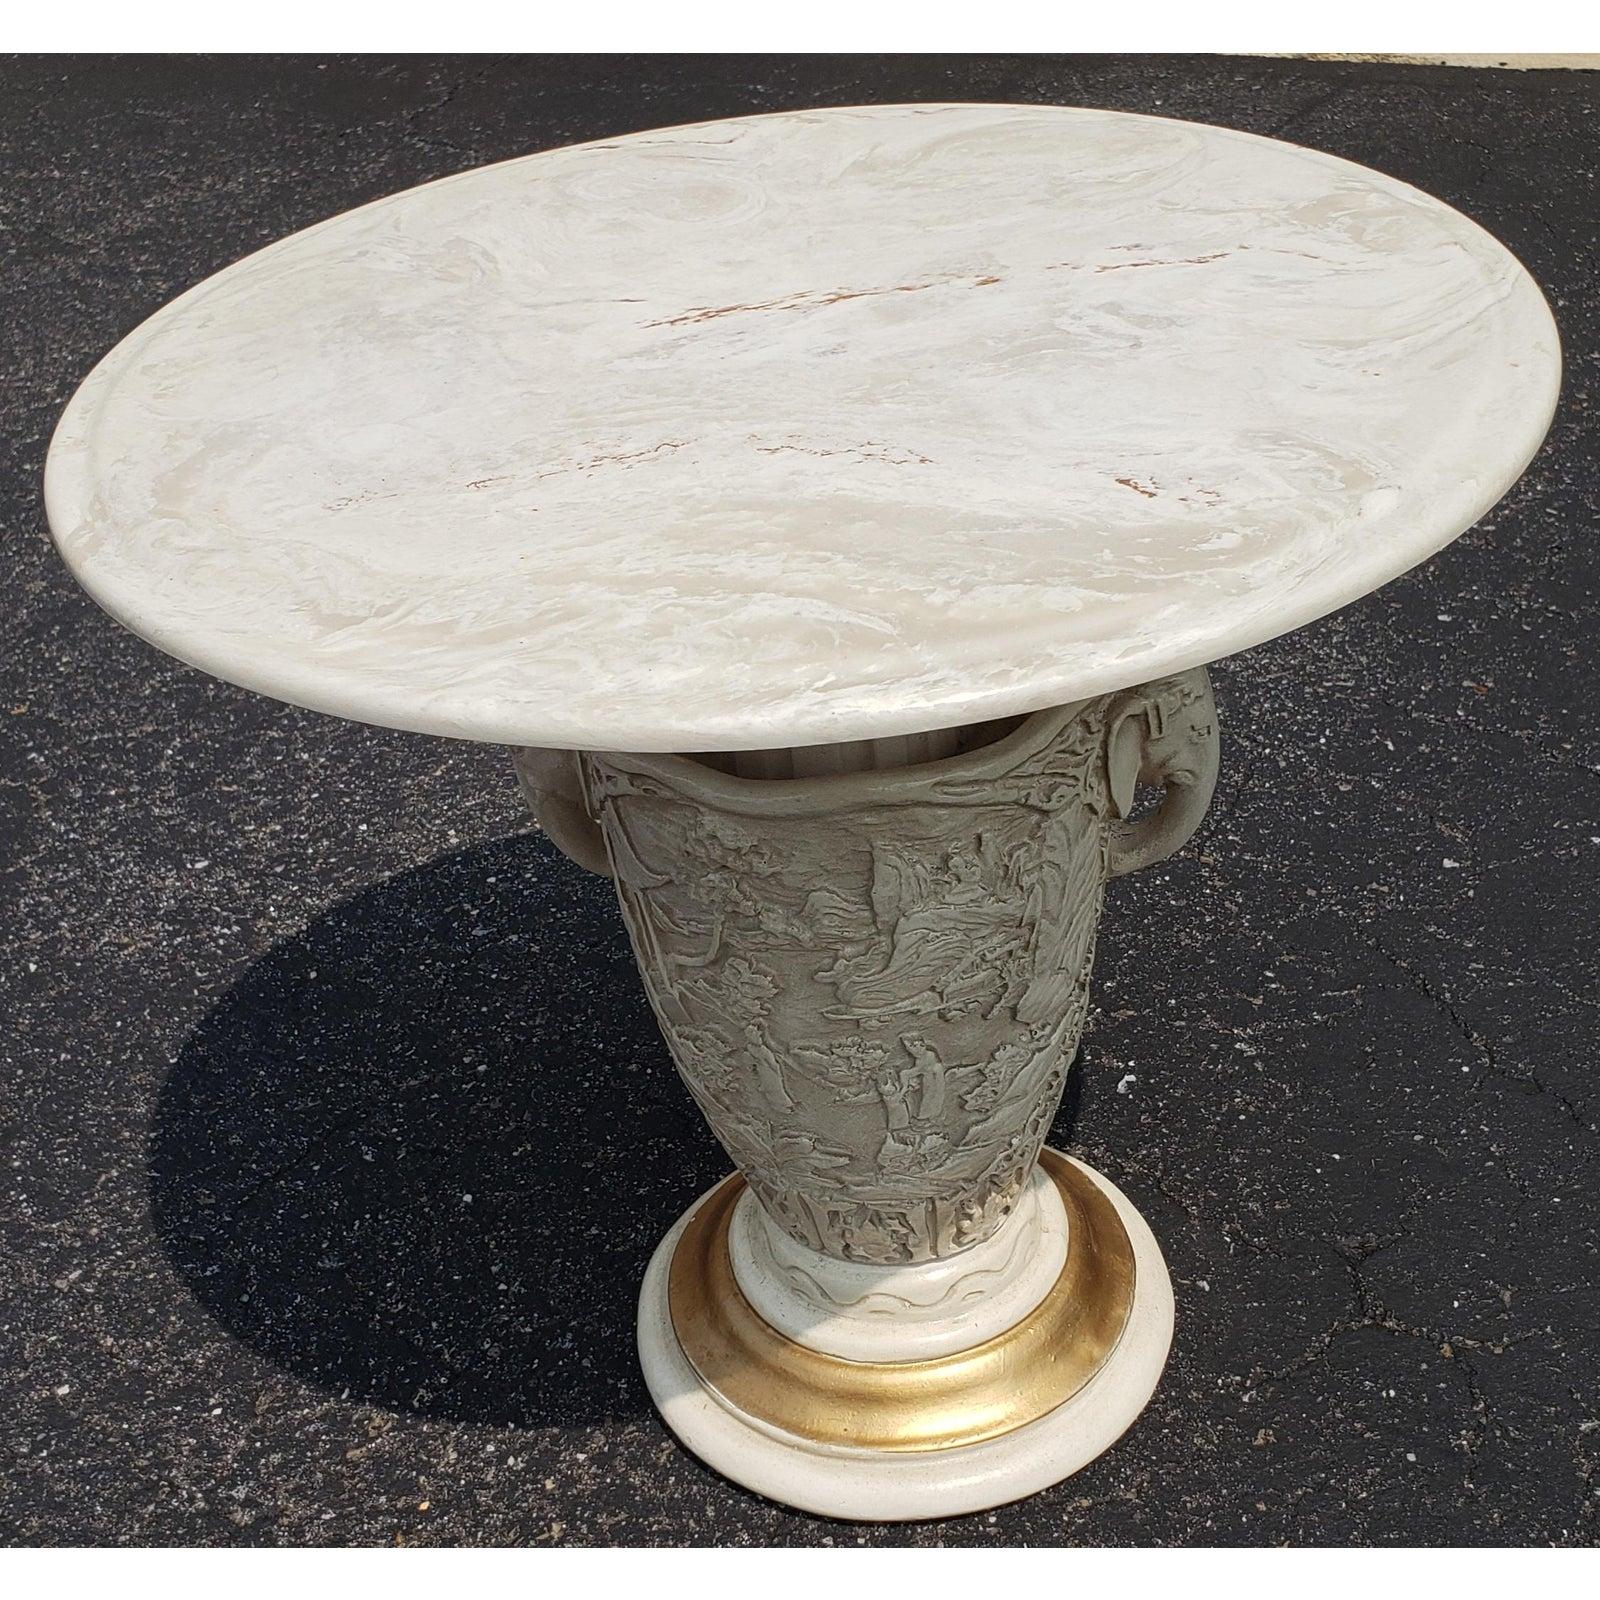 Baroque Revival 1960s Italian White Onyx Stone Top Pedestal Accent Table For Sale